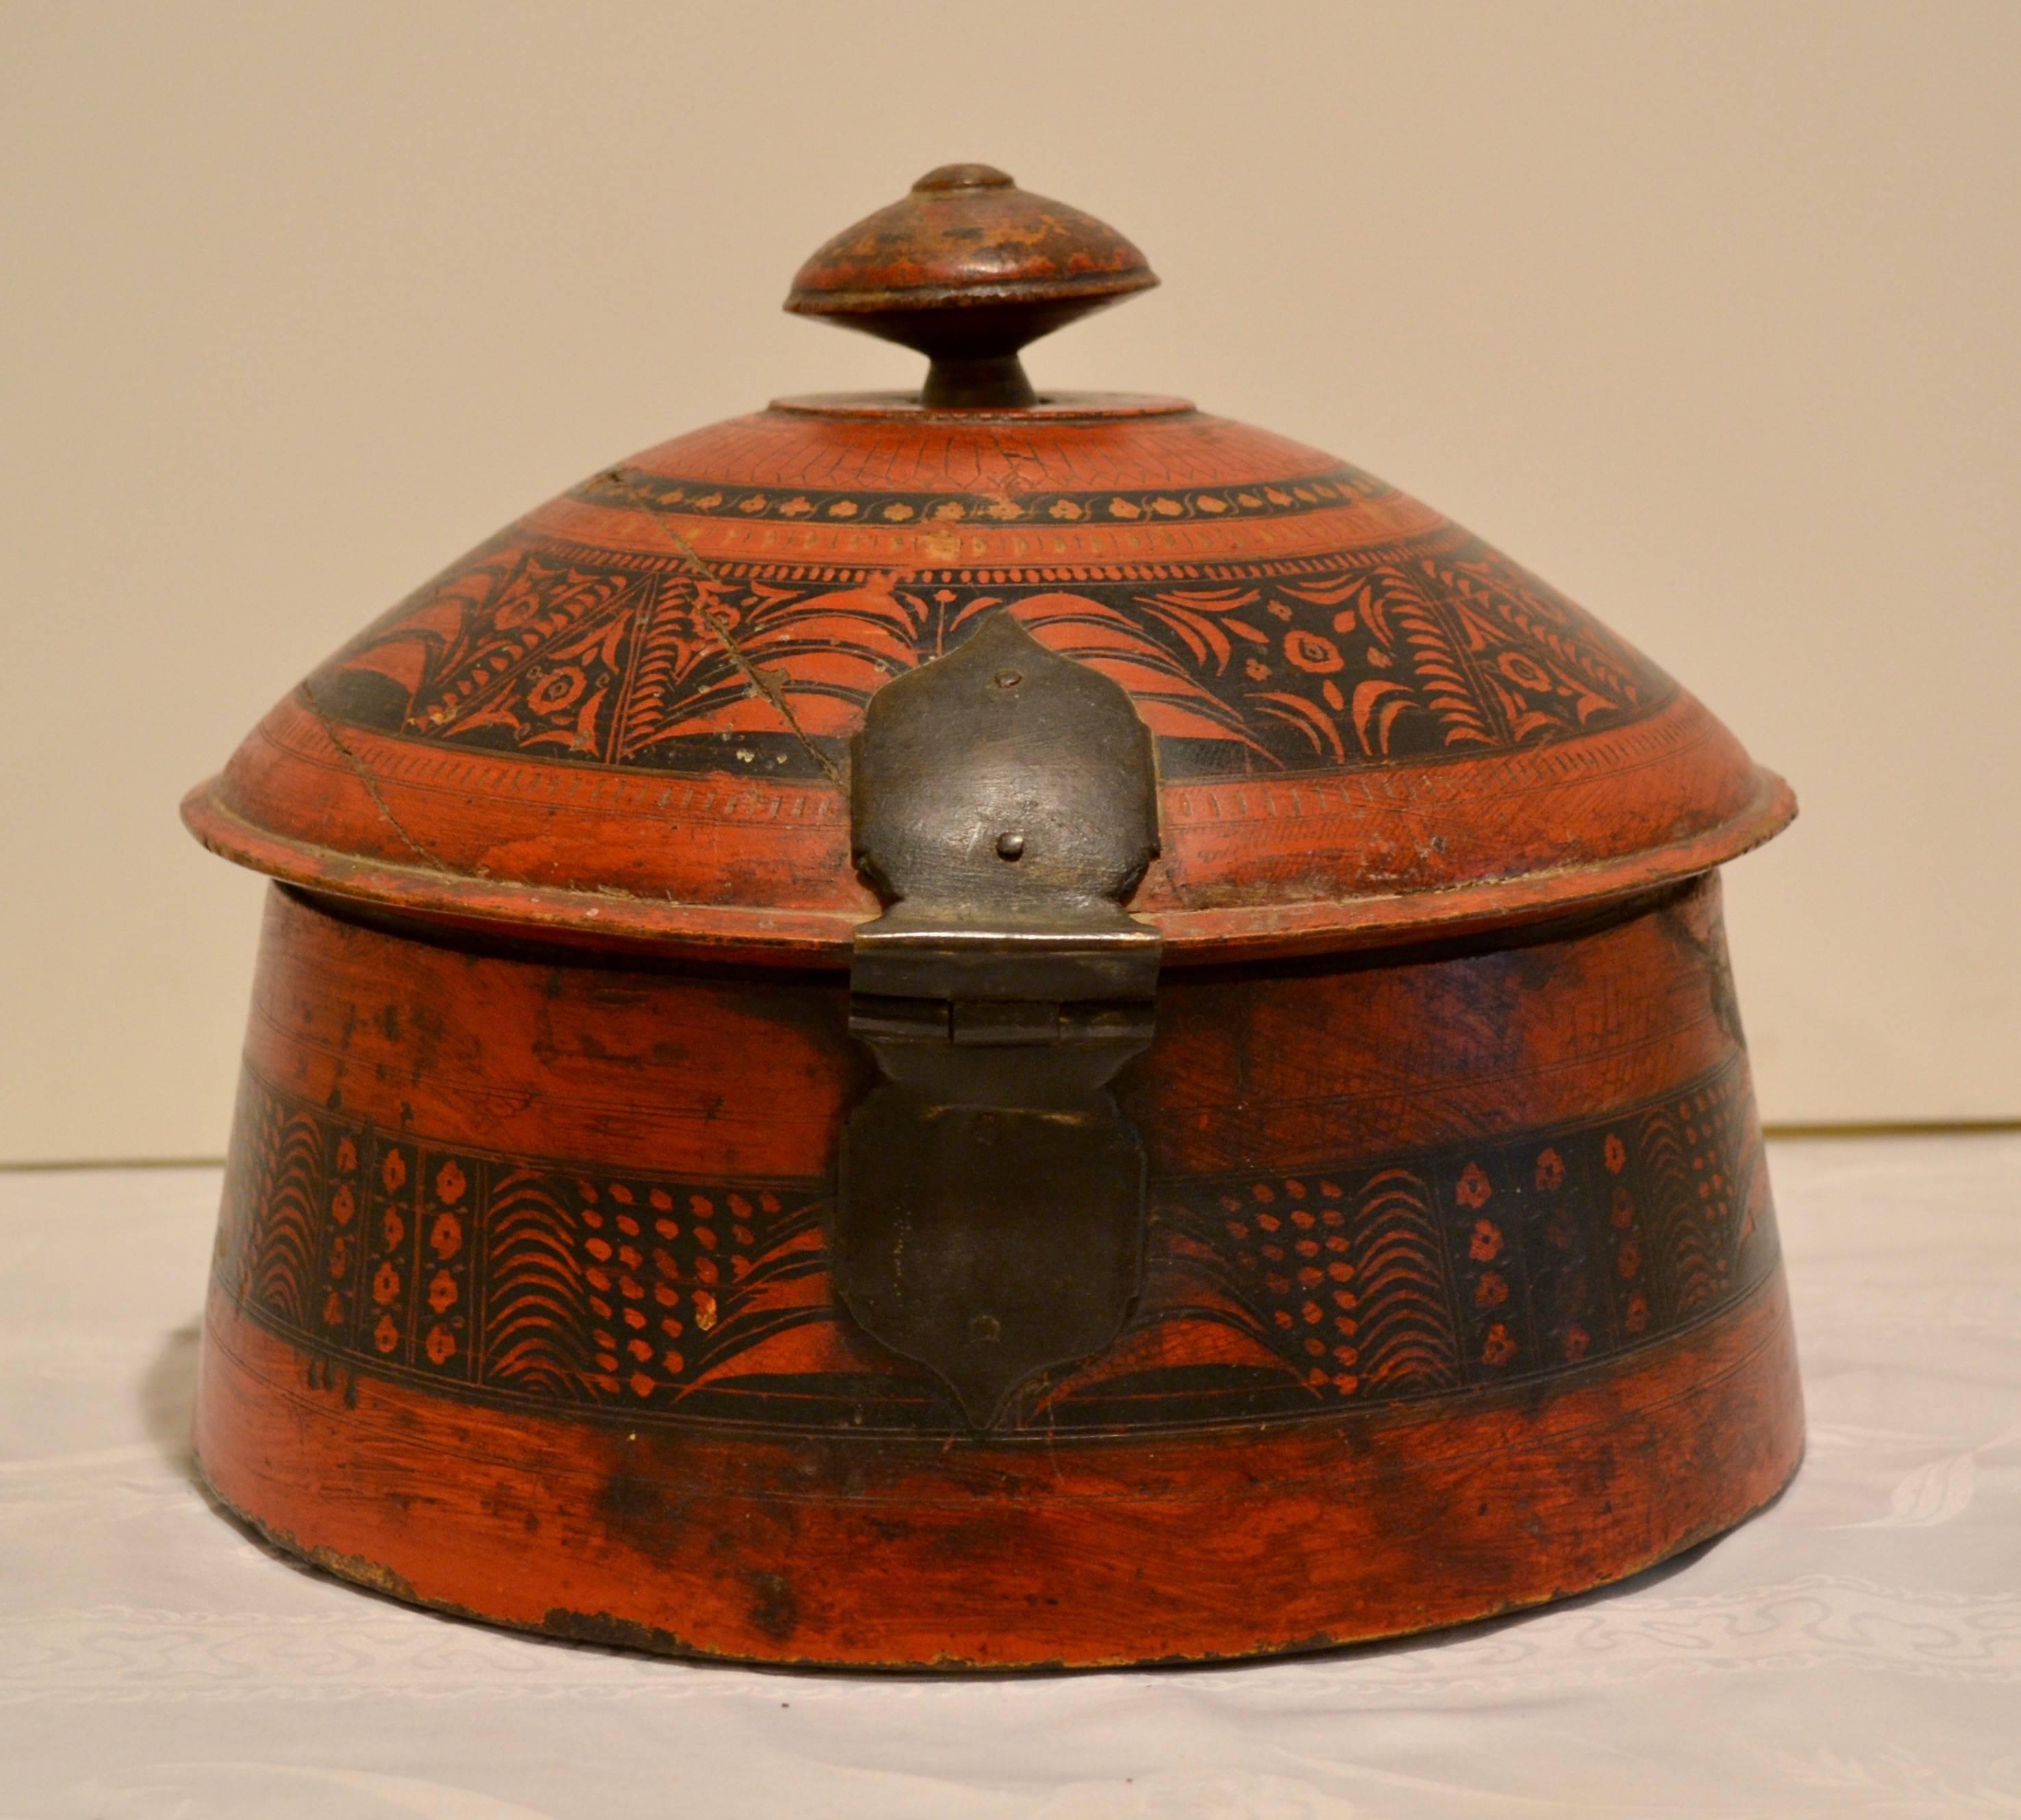 This is an outstanding antique hand-turned wooden spice box from Pakistan, with beautifully incised and hand-painted floral and leaf decoration in red and black. One of the largest examples we have seen, the bold domed lid opens on an iron hinge to